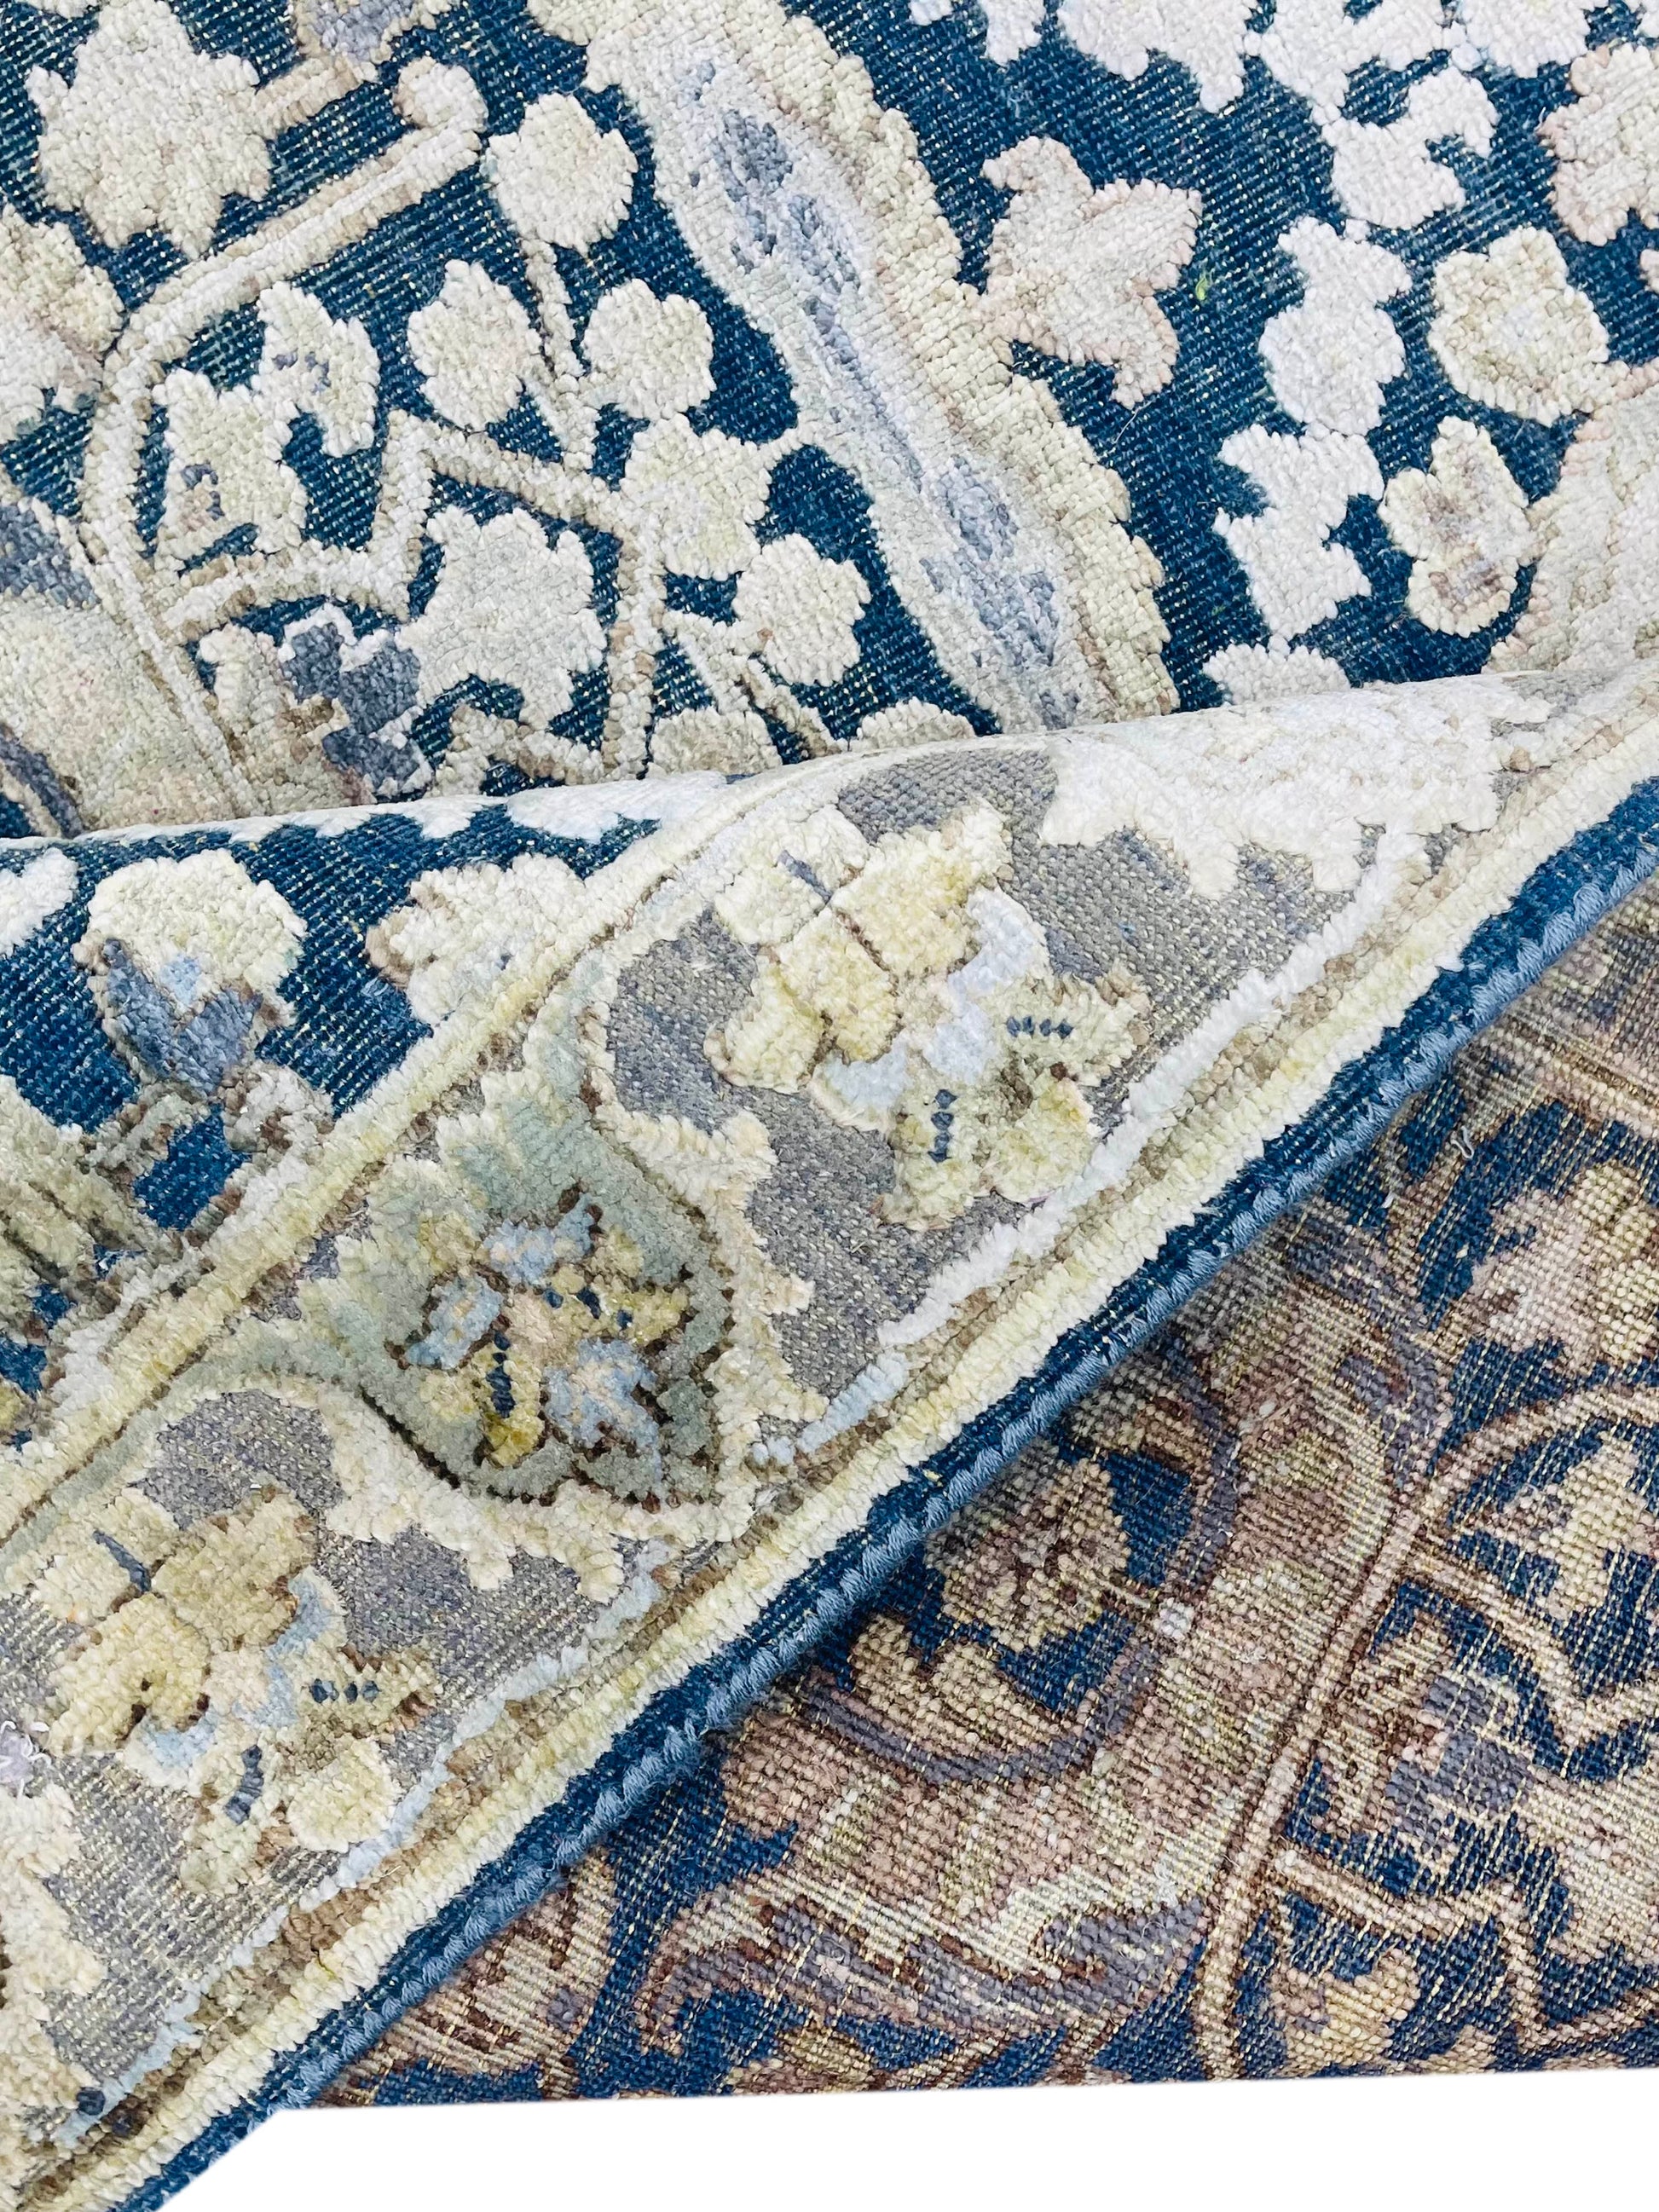 Get trendy with Ivory & Blue Viscose & Wool Contemporary Handknotted Area Rug 8.10x12.0ft 268x367Cms - Contemporary Rugs available at Jaipur Oriental Rugs. Grab yours for $4455.00 today!